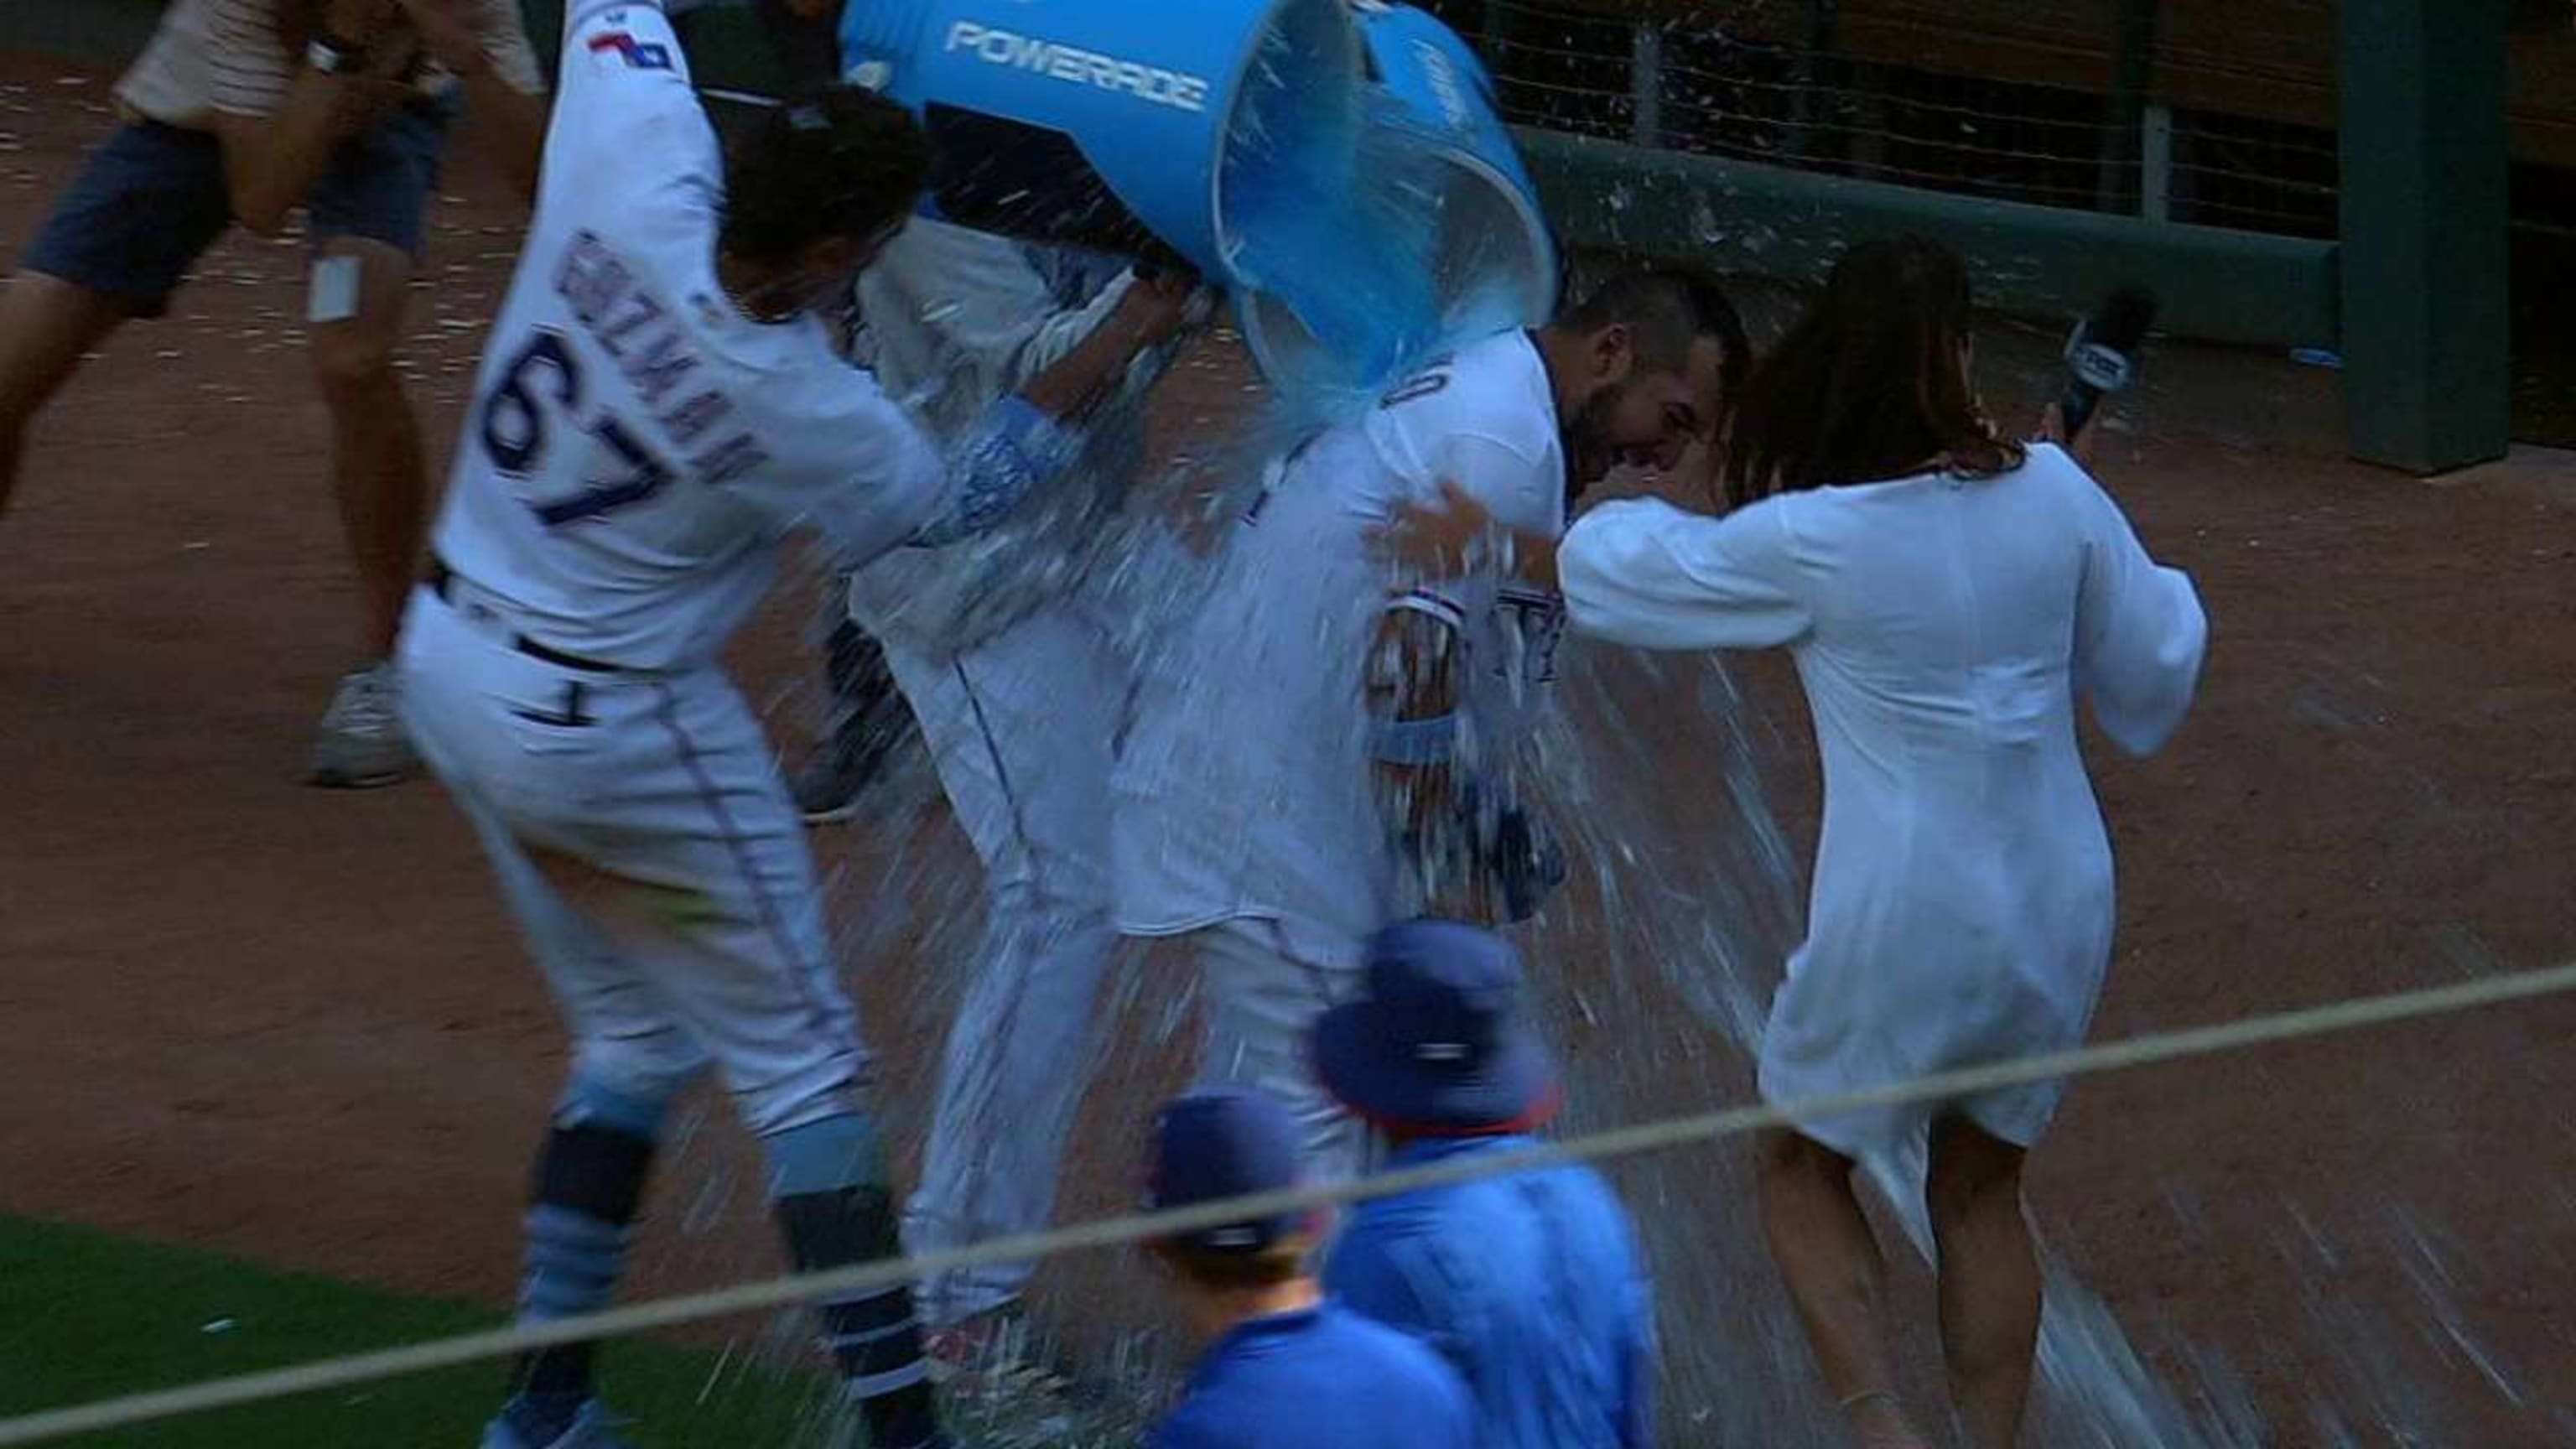 Jose Trevino gives Rangers walk-off win over Rockies